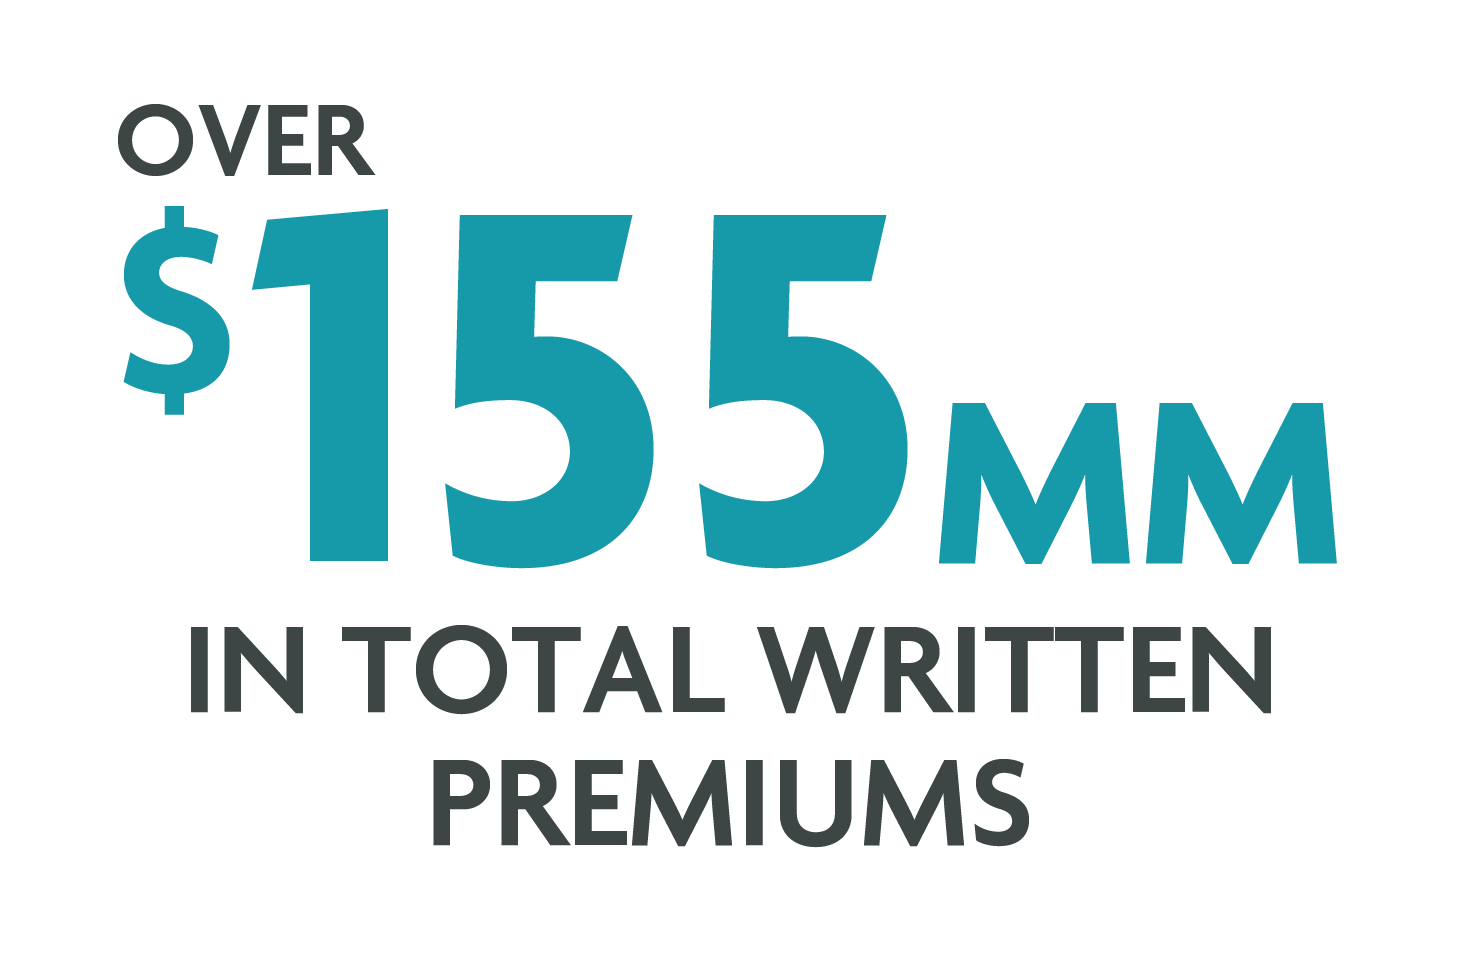 Over $155 million in total written premiums